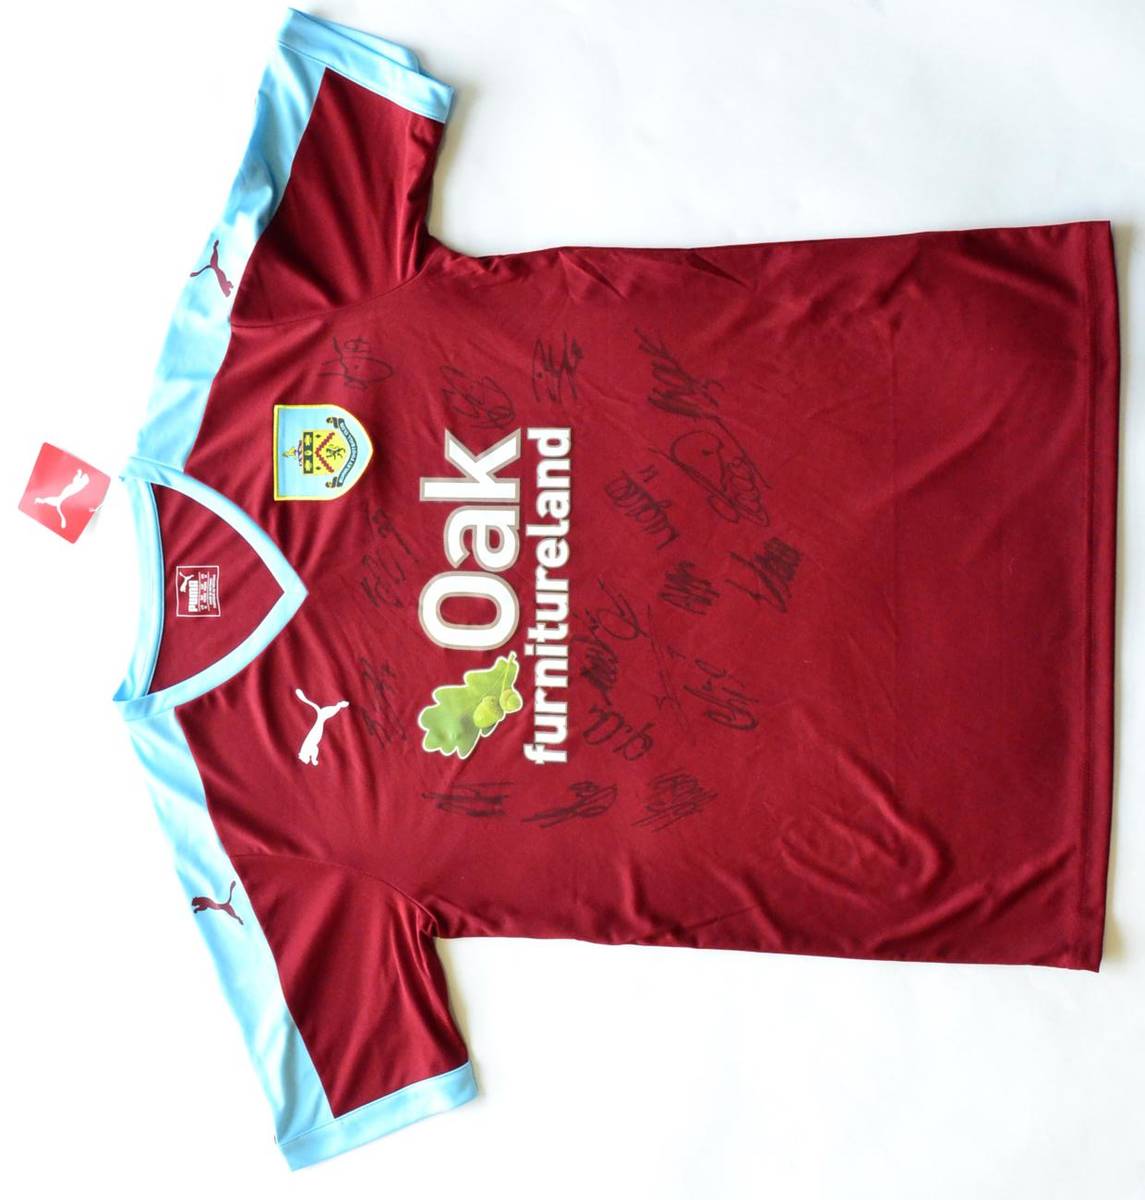 Lot 55 - Signed Football Shirt Burnley, claret and blue